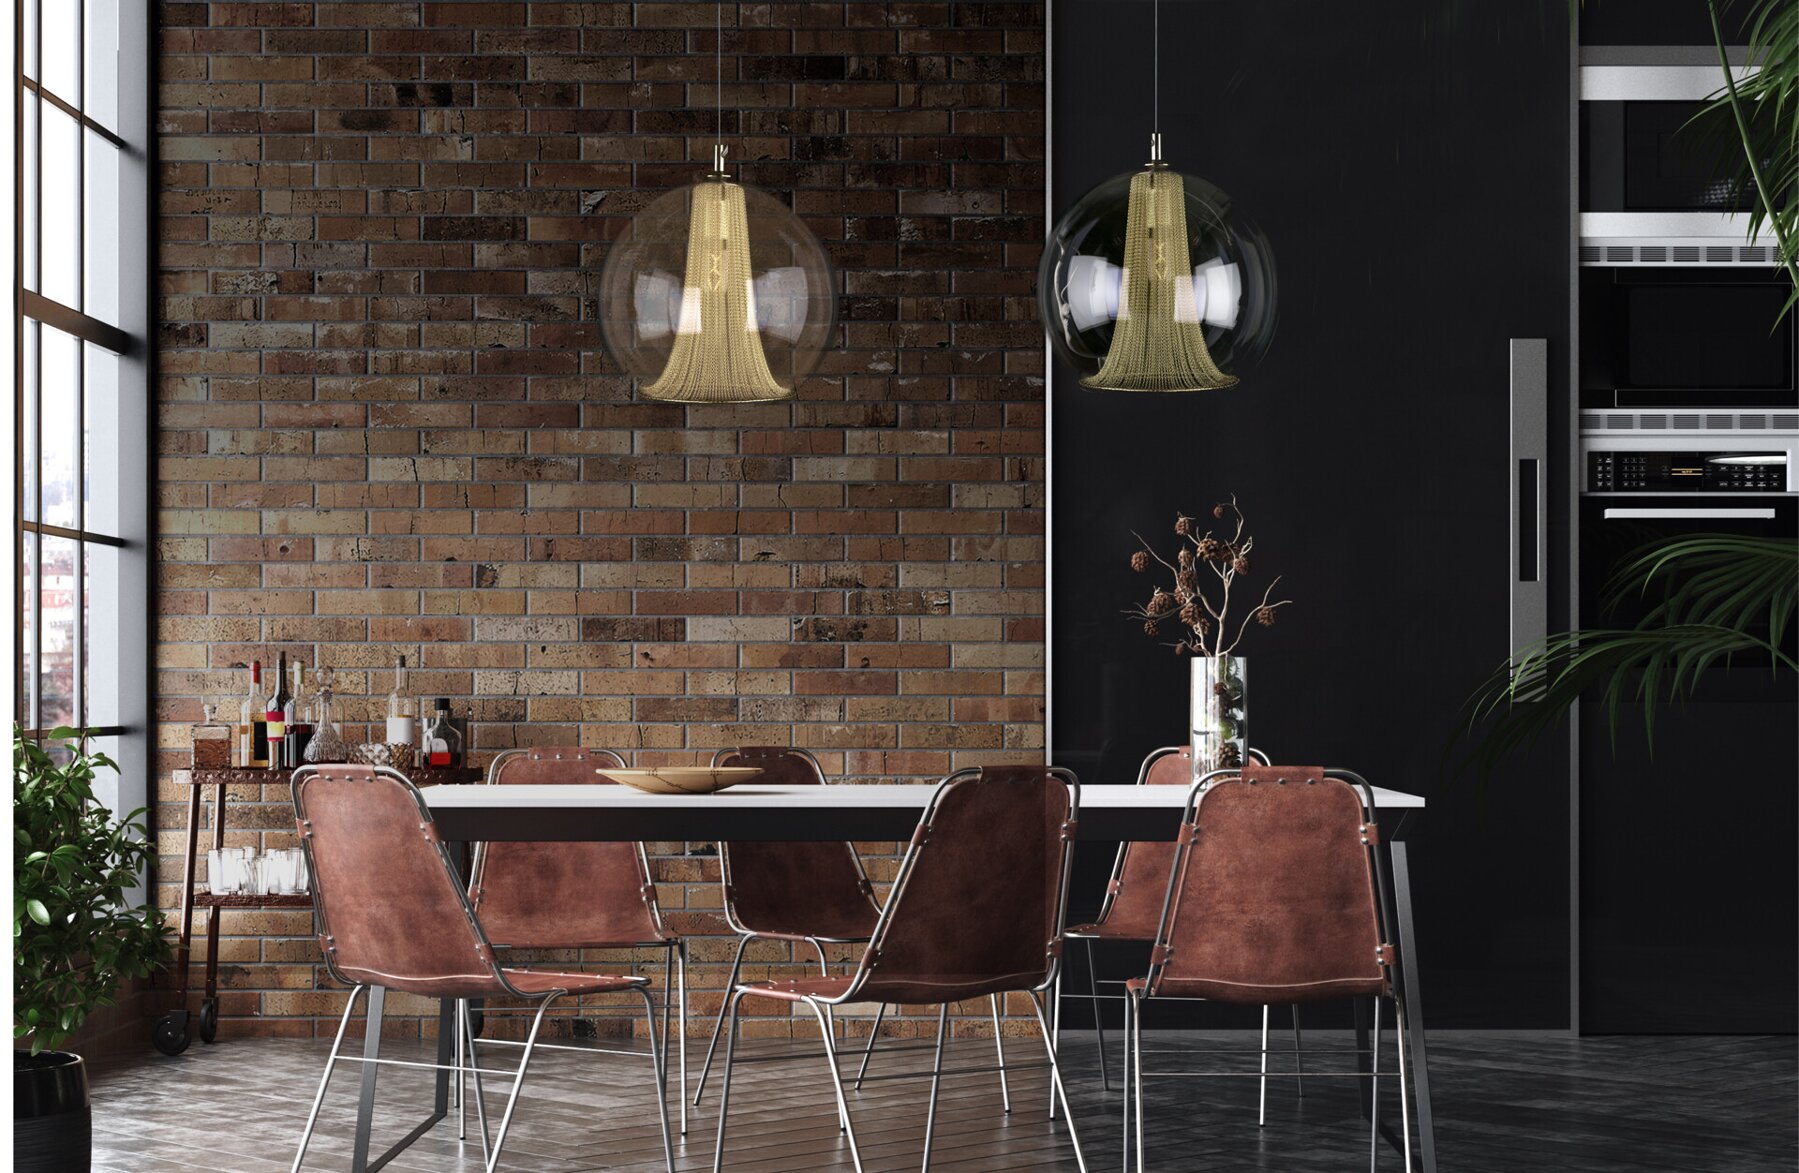 Chandelier above the dining table in industrial style LV025